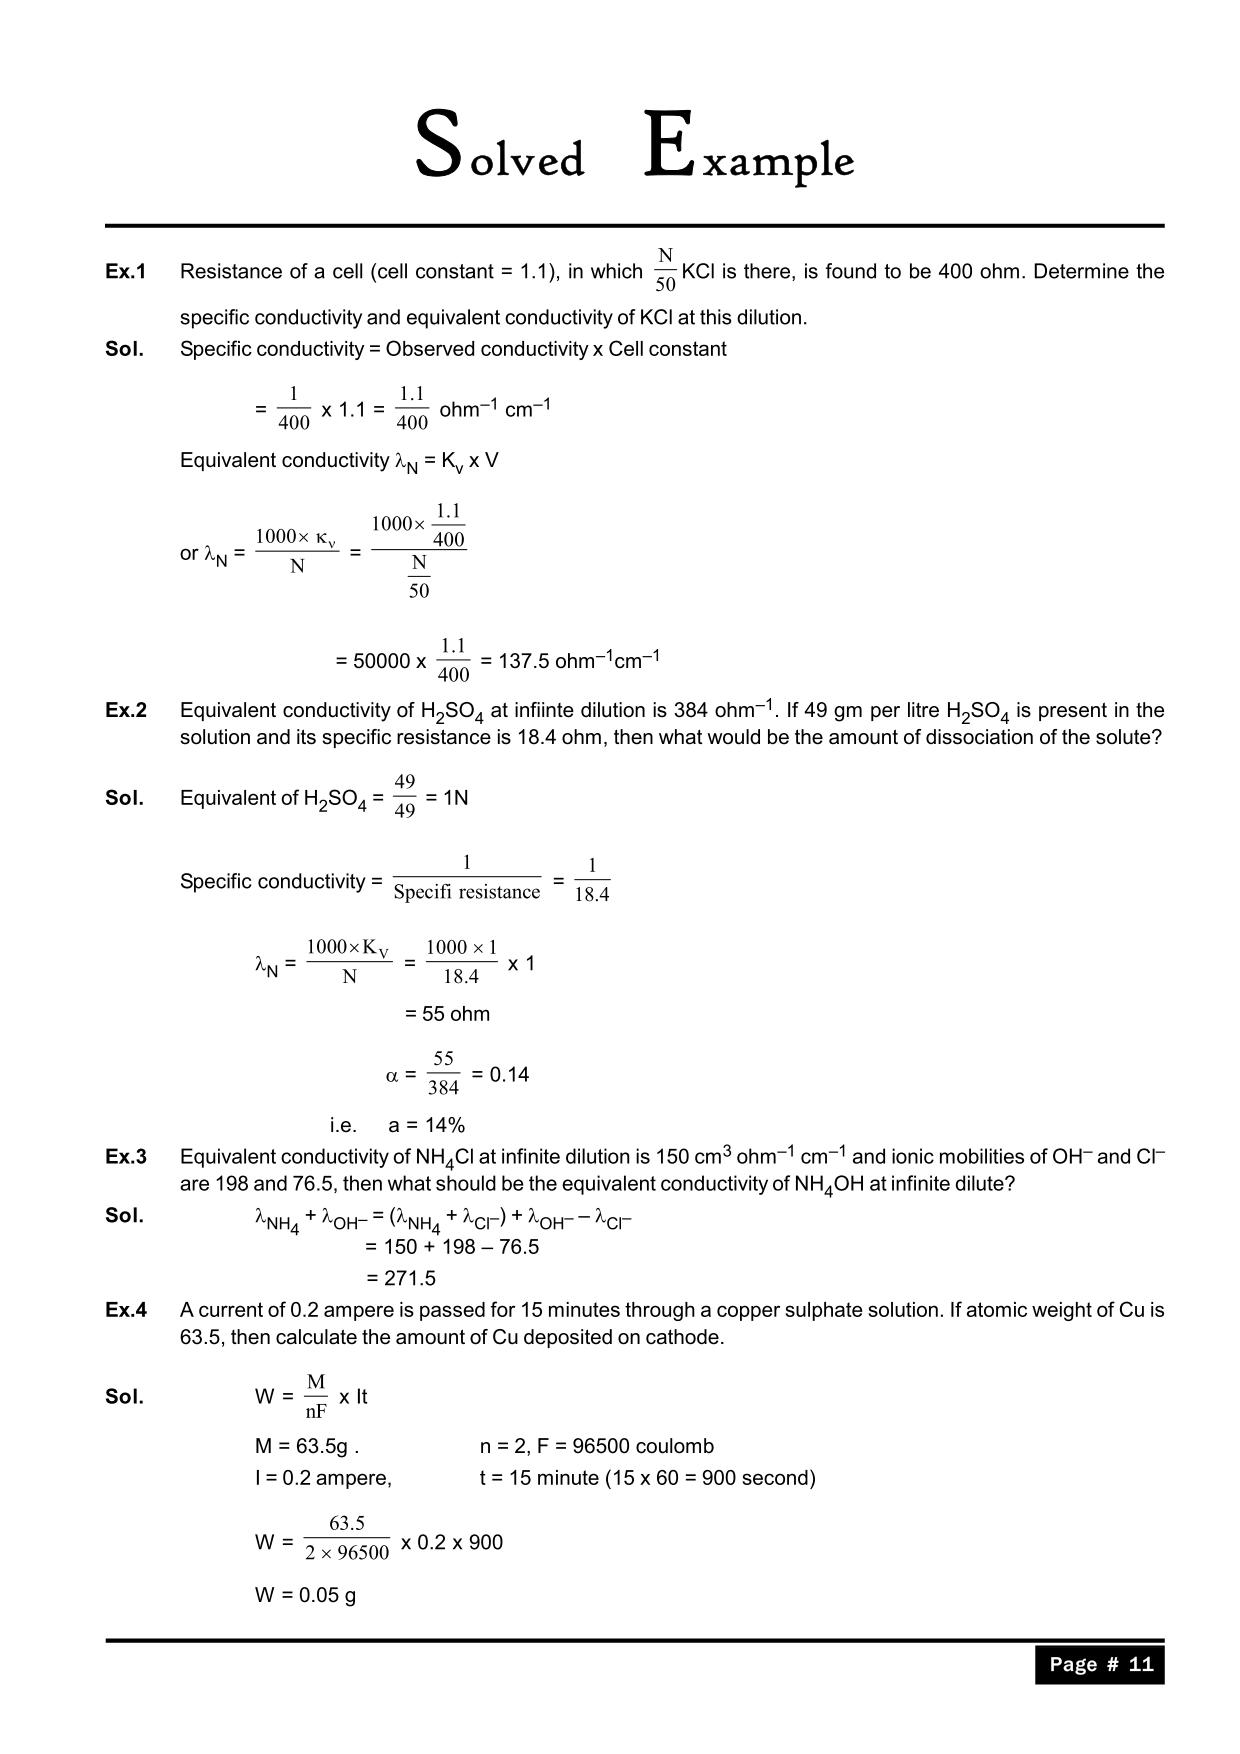  Electrochemistry Notes for Class 12 : Solved Examples